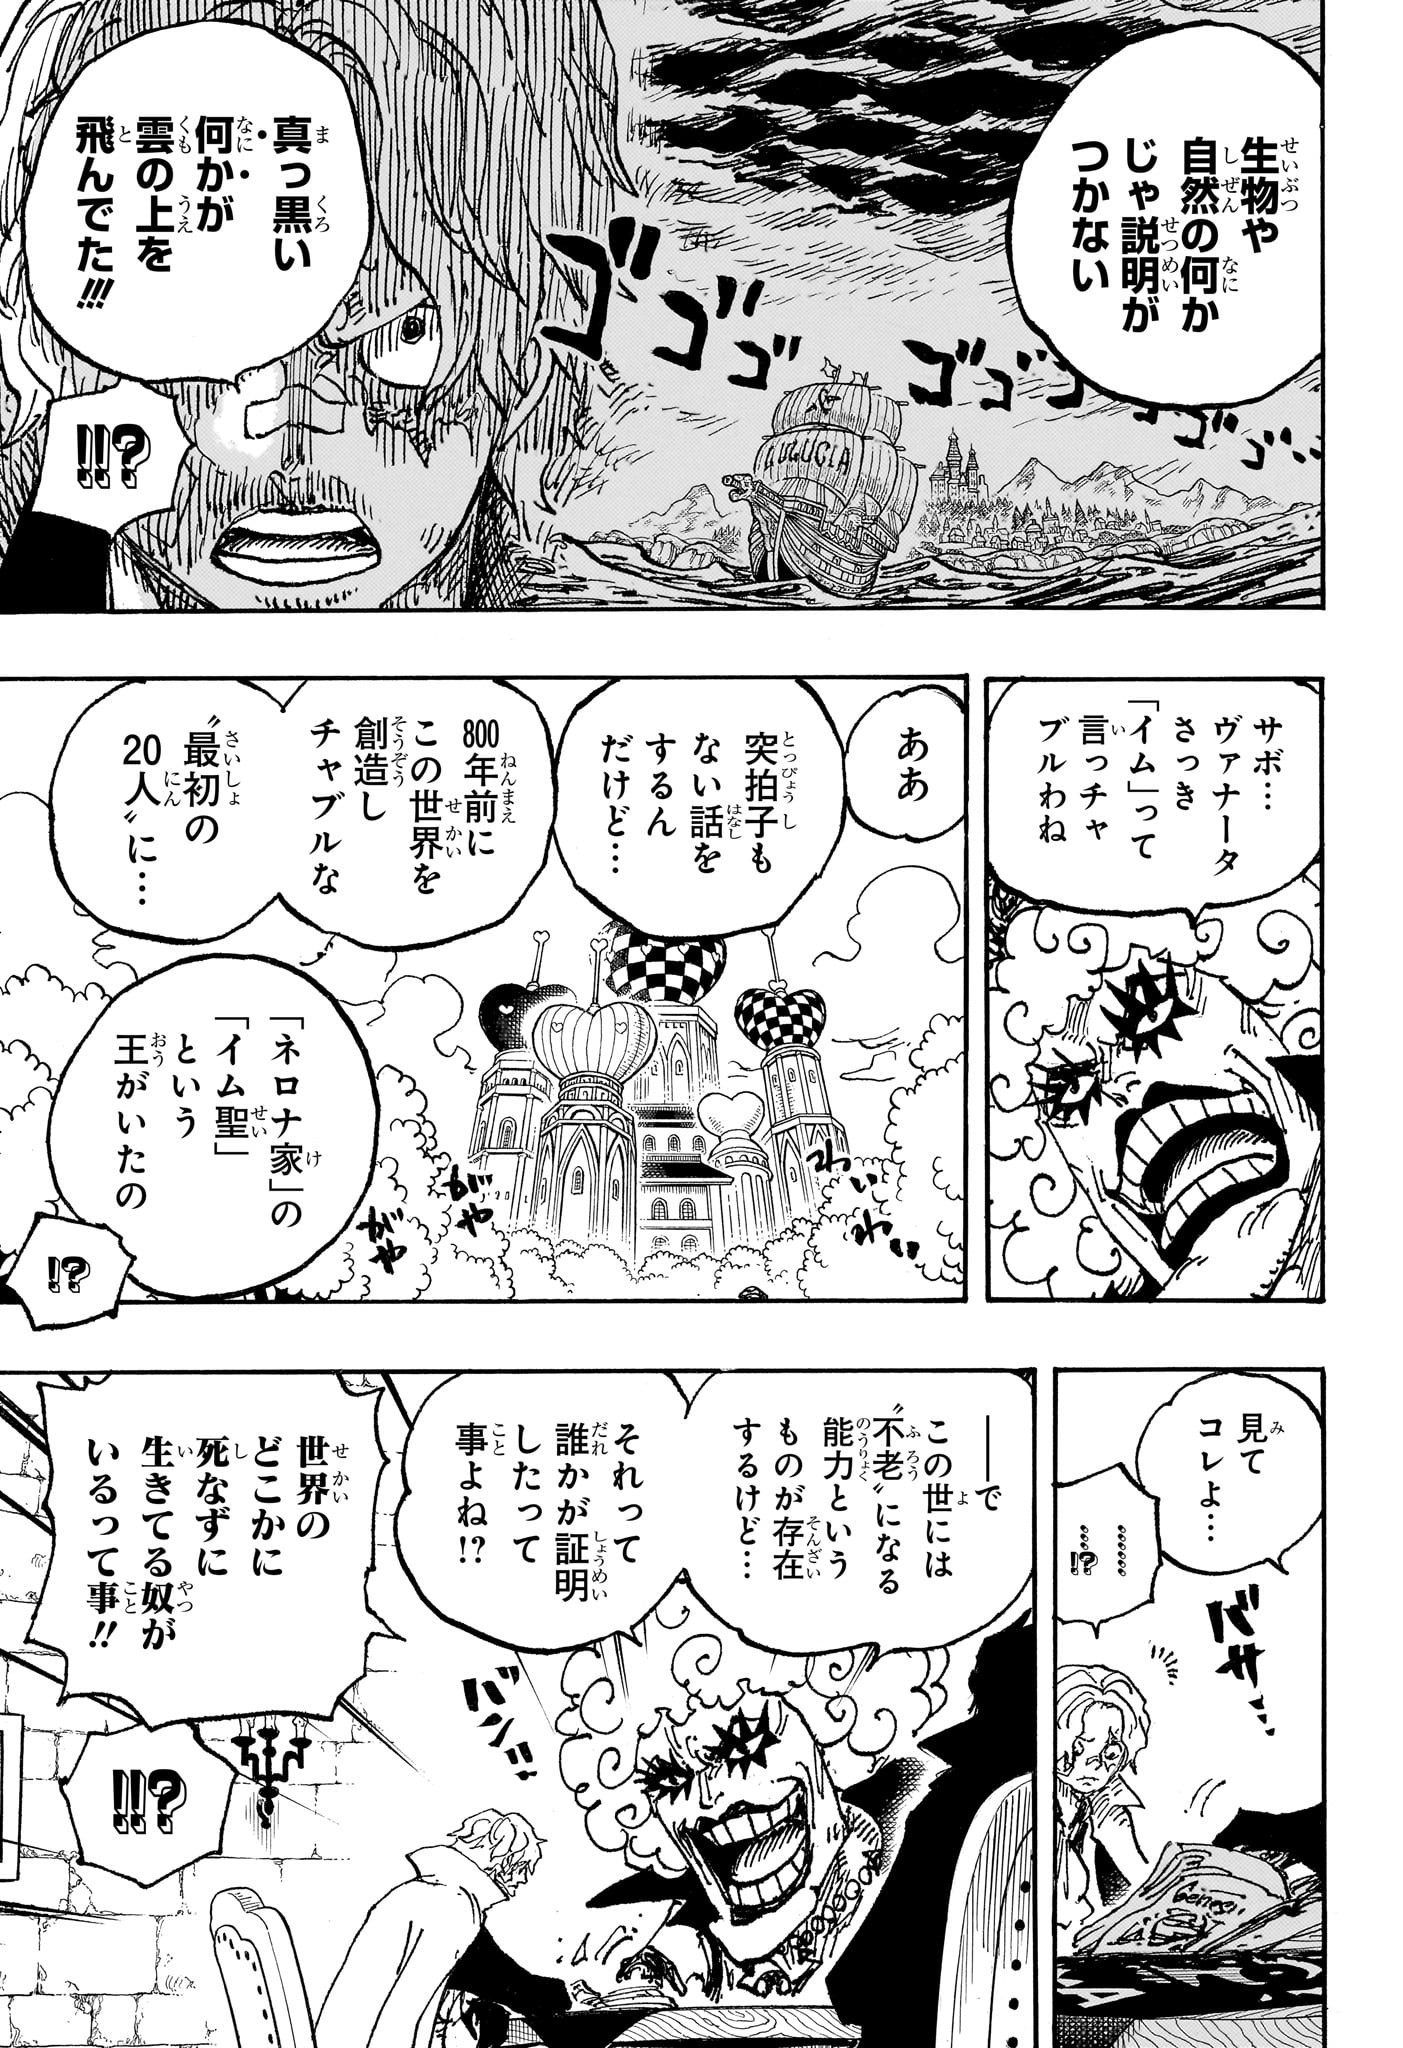 One Piece - Chapter 1086 - Page 13